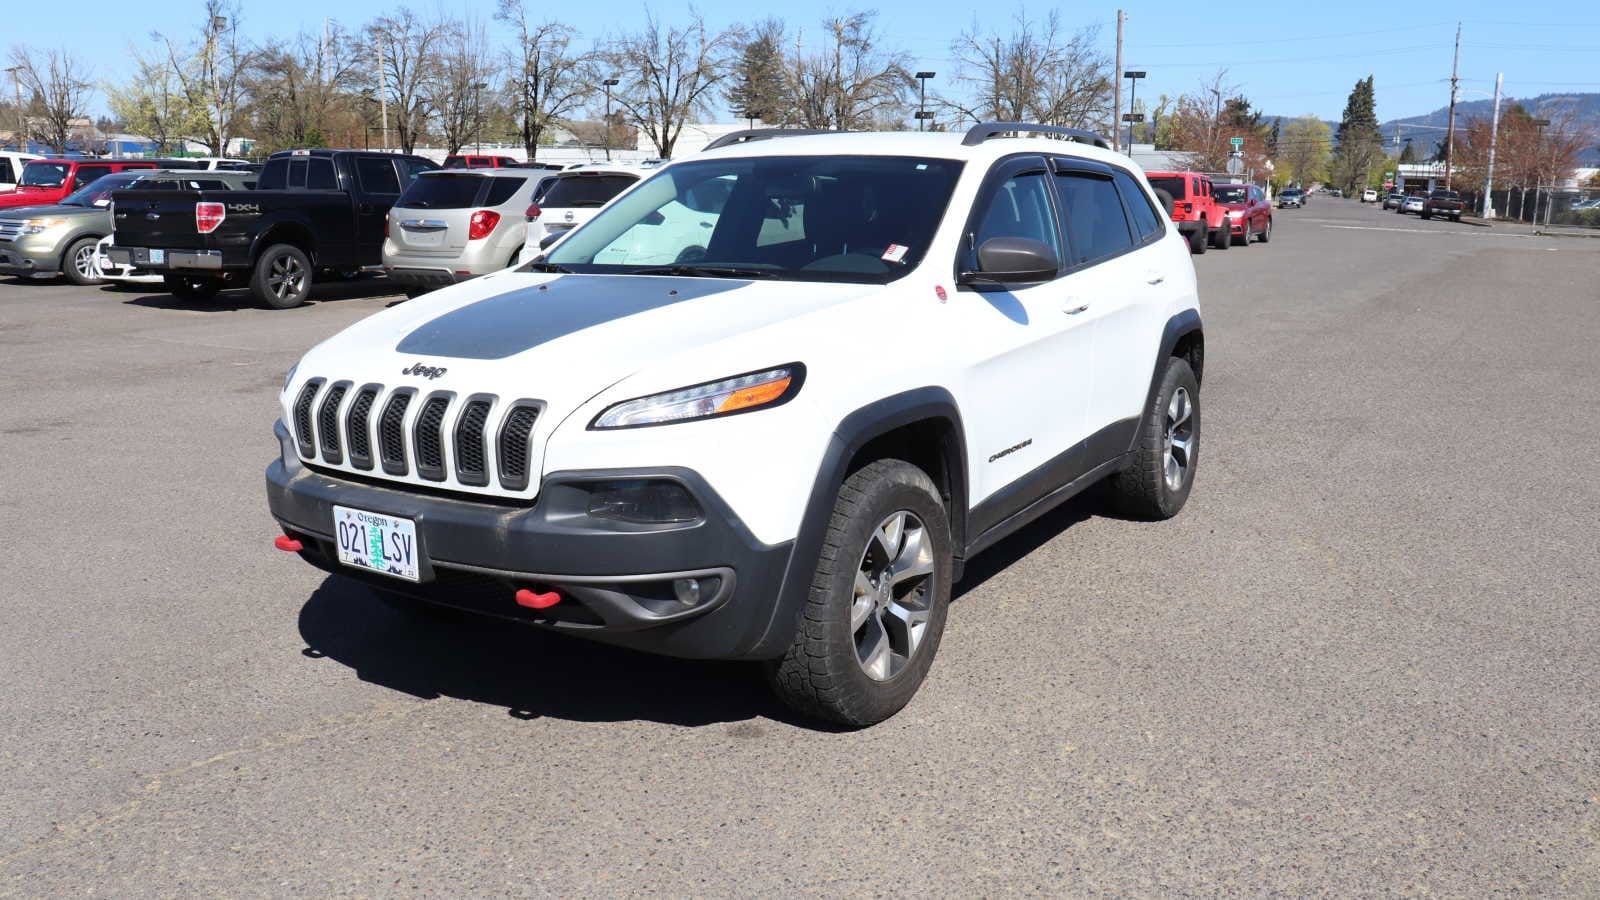 2015 Jeep Cherokee Trailhawk -
                Springfield, OR